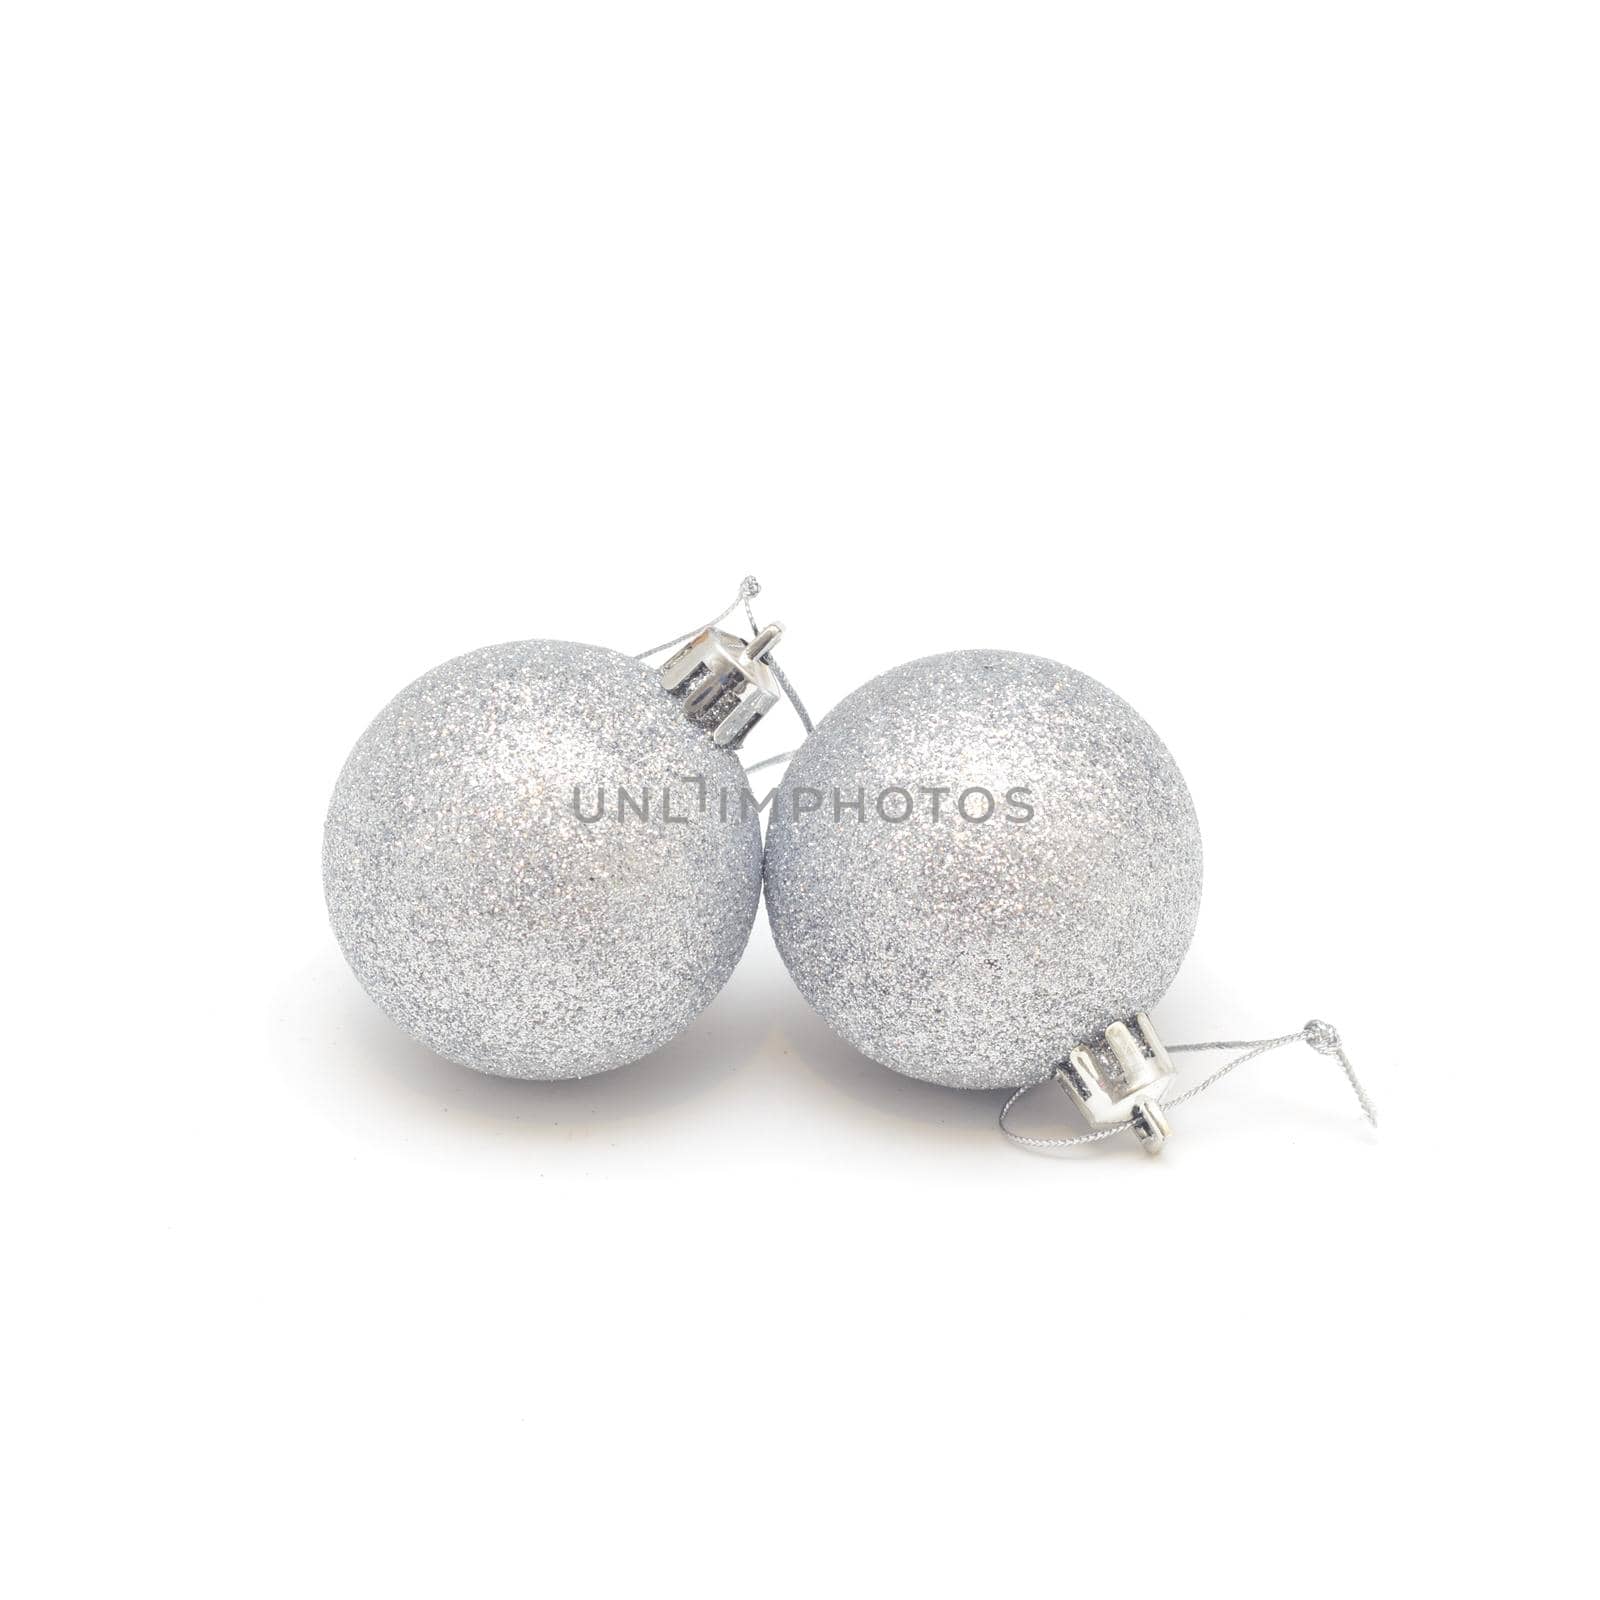 Two Christmas silver balls isolated on white background